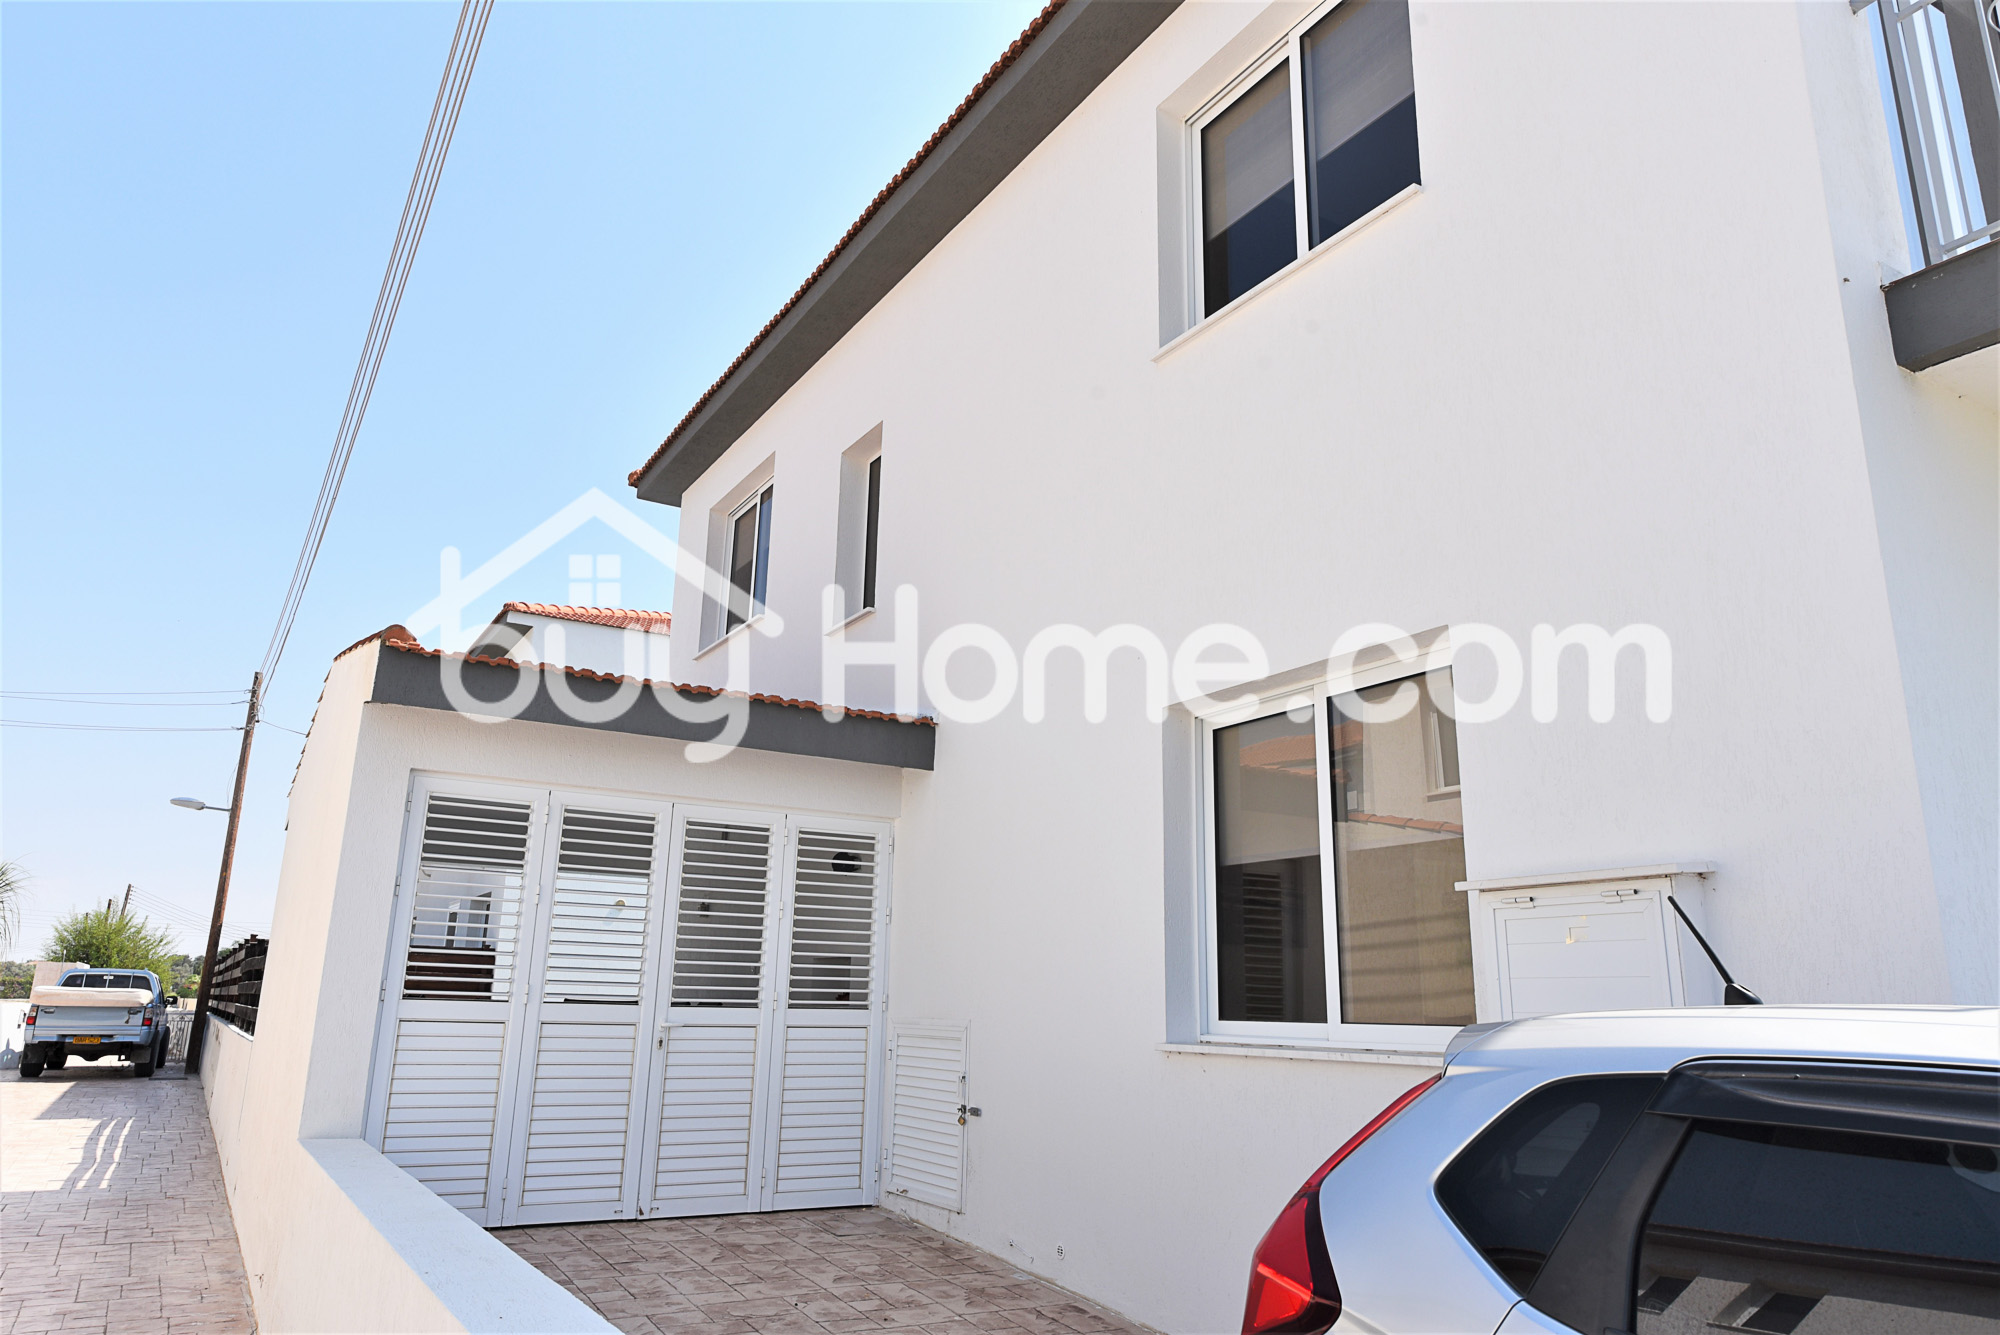 4 Bedroom House with Pool | BuyHome